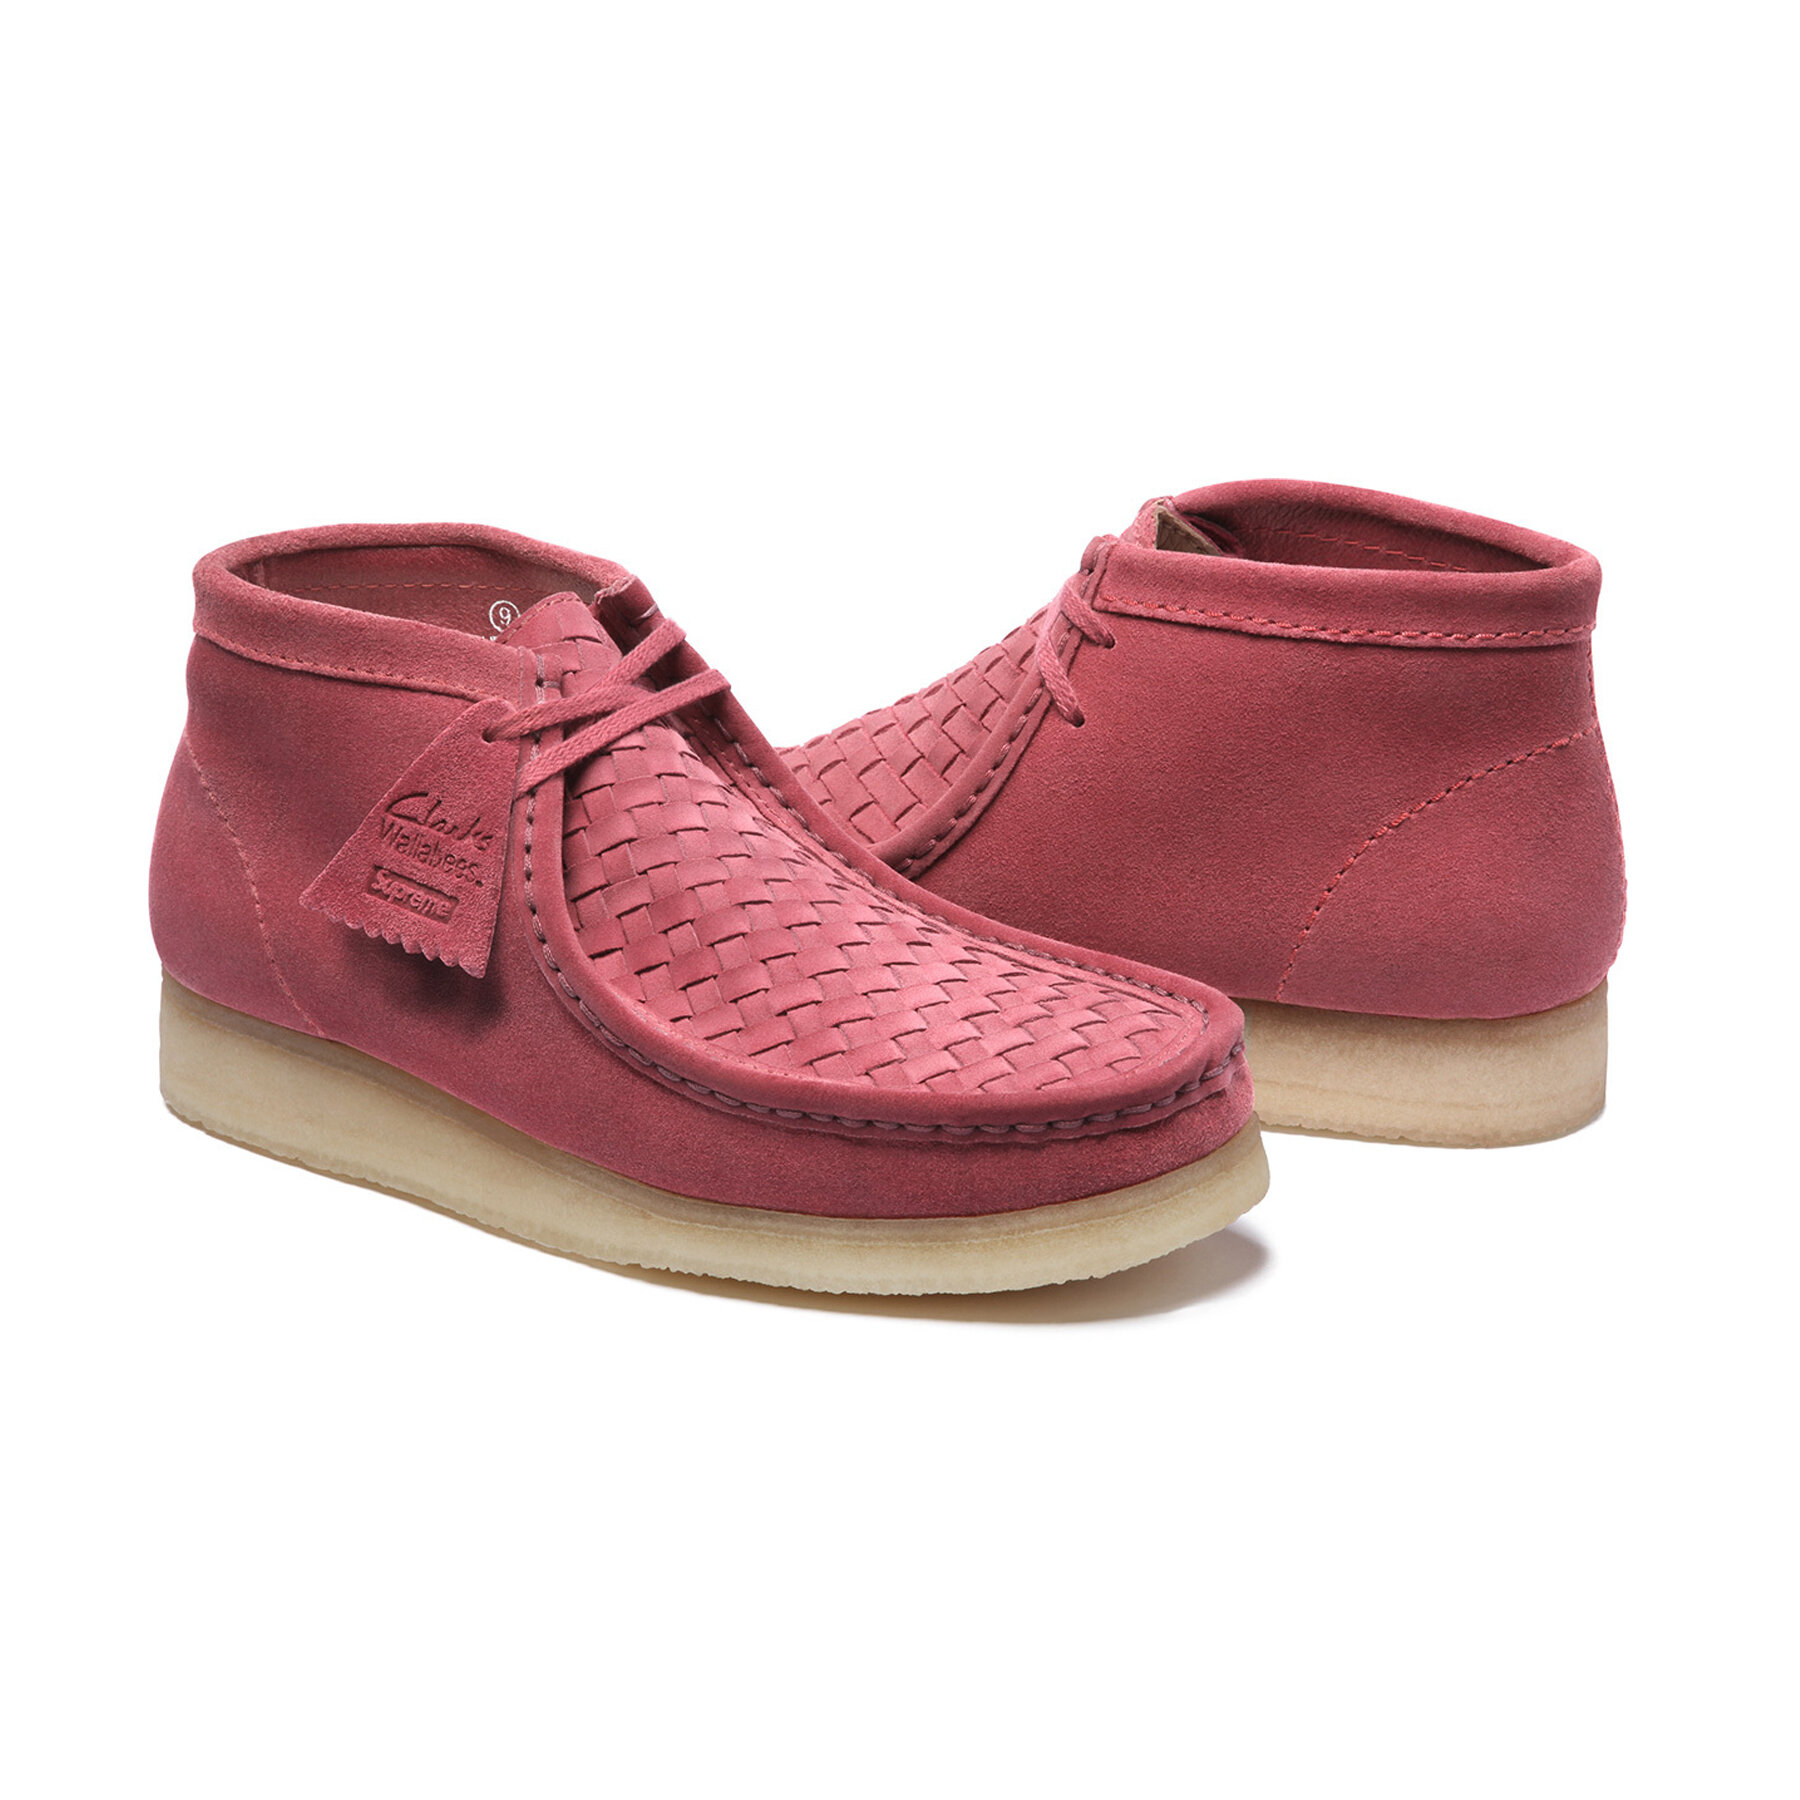 SS16 Supreme x Clarks Wallabee BT 'Rose' (2016) — The Pop-Up📍